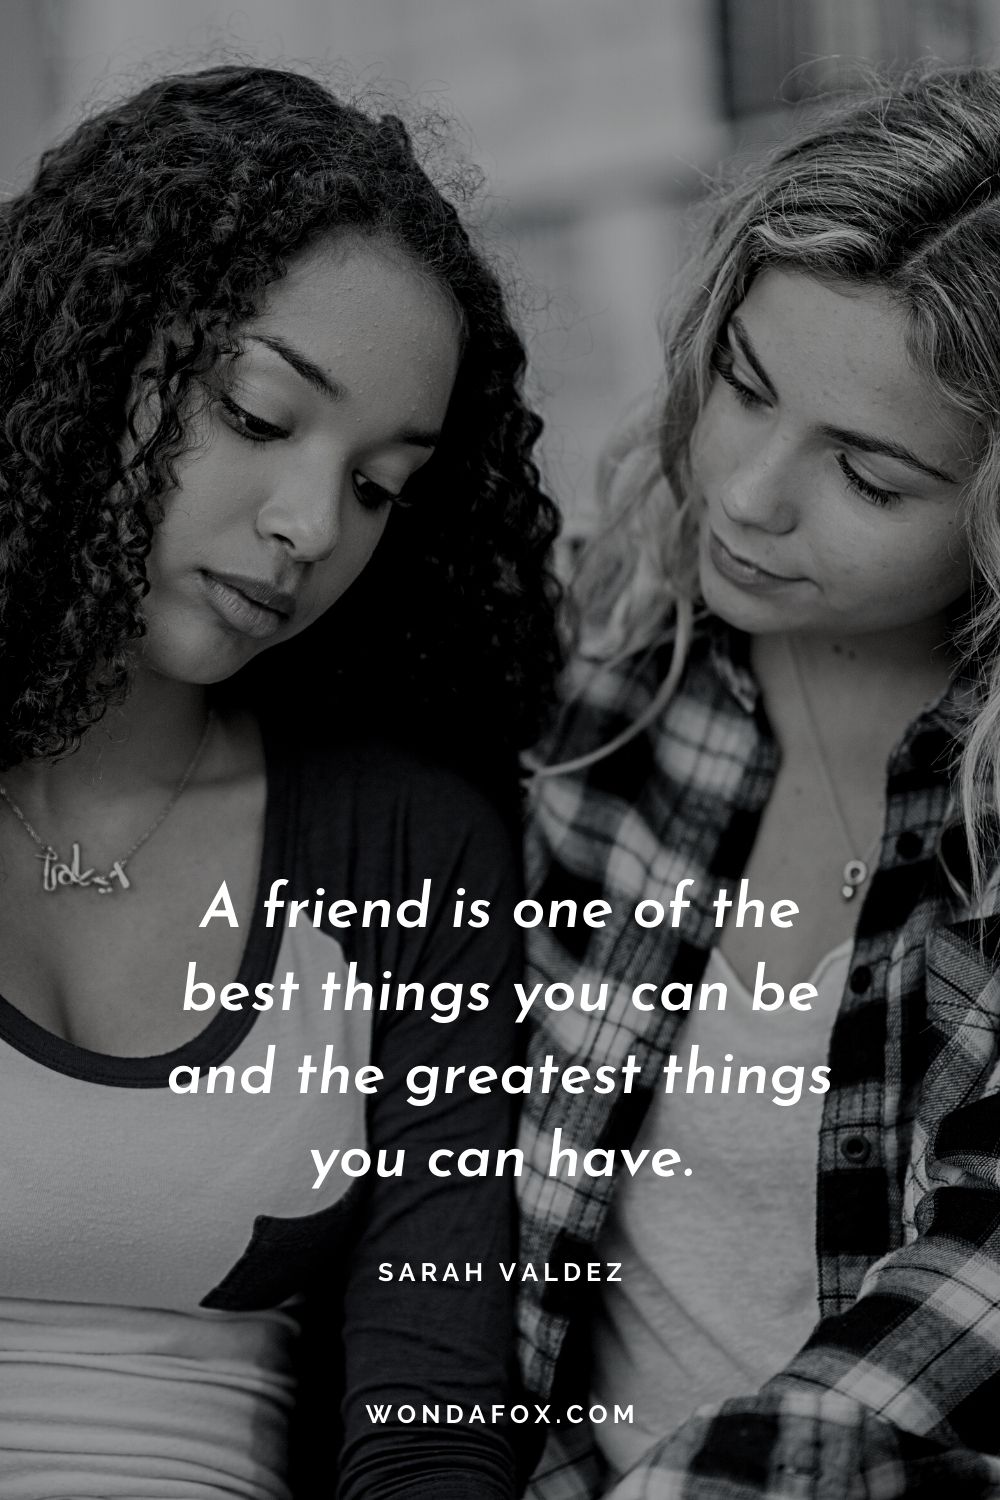 A friend is one of the best things you can be and the greatest things you can have.